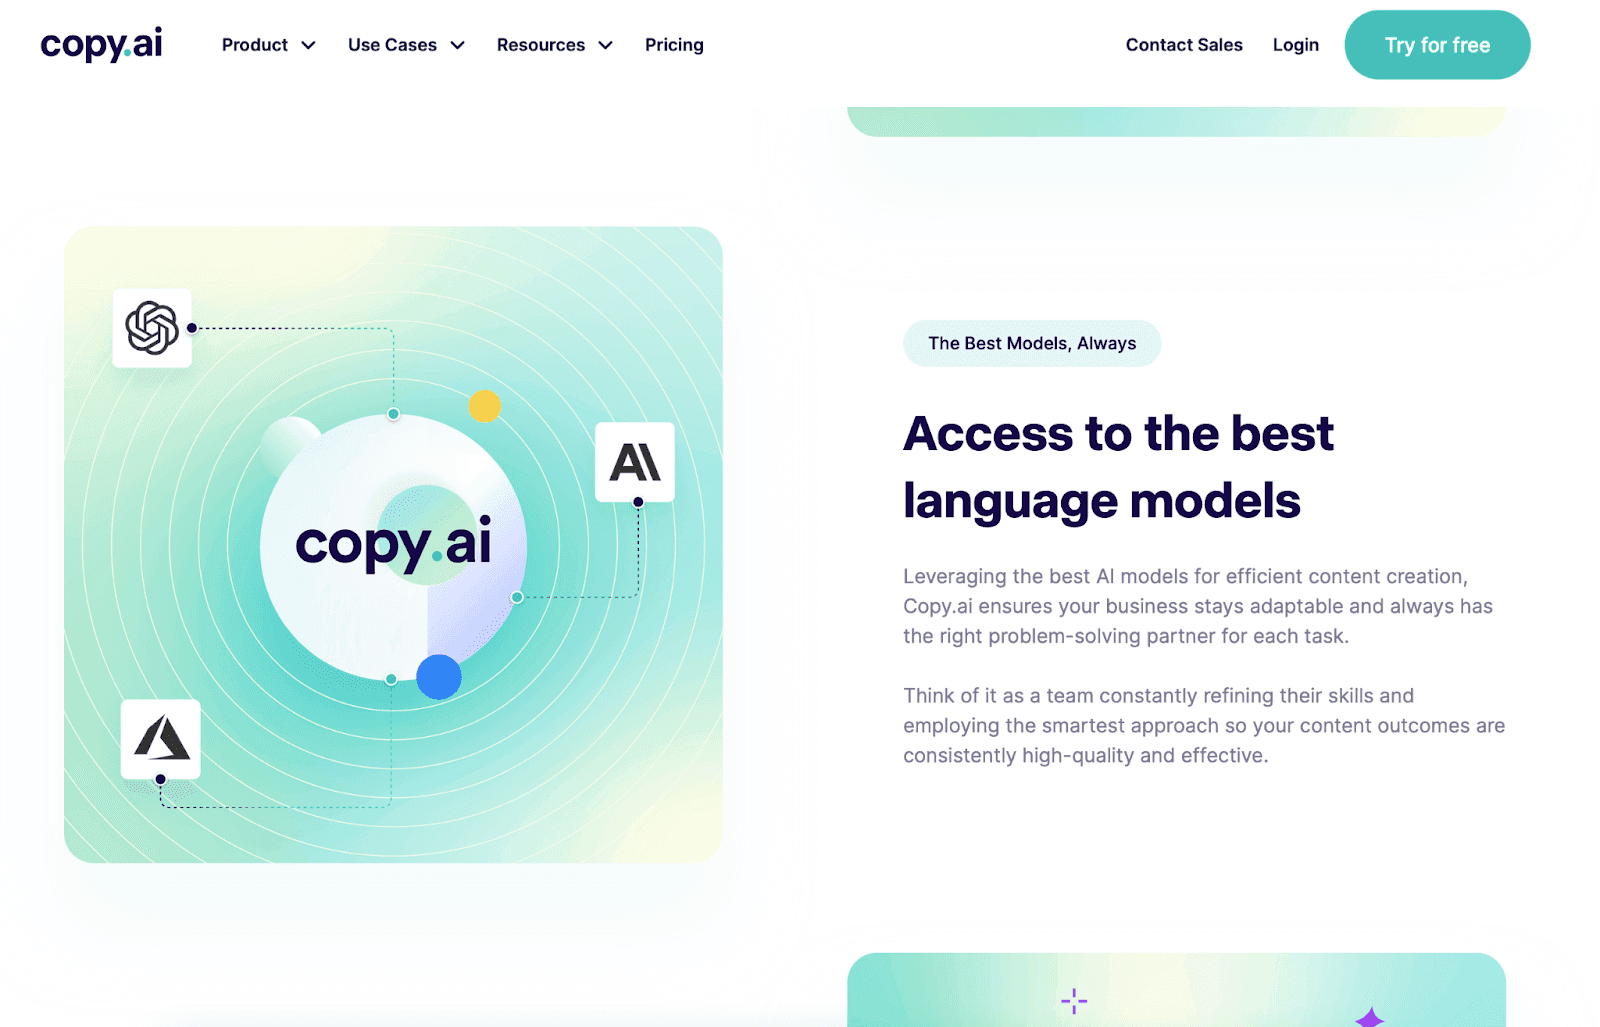 Copy.ai website landing page - Access to the best language models